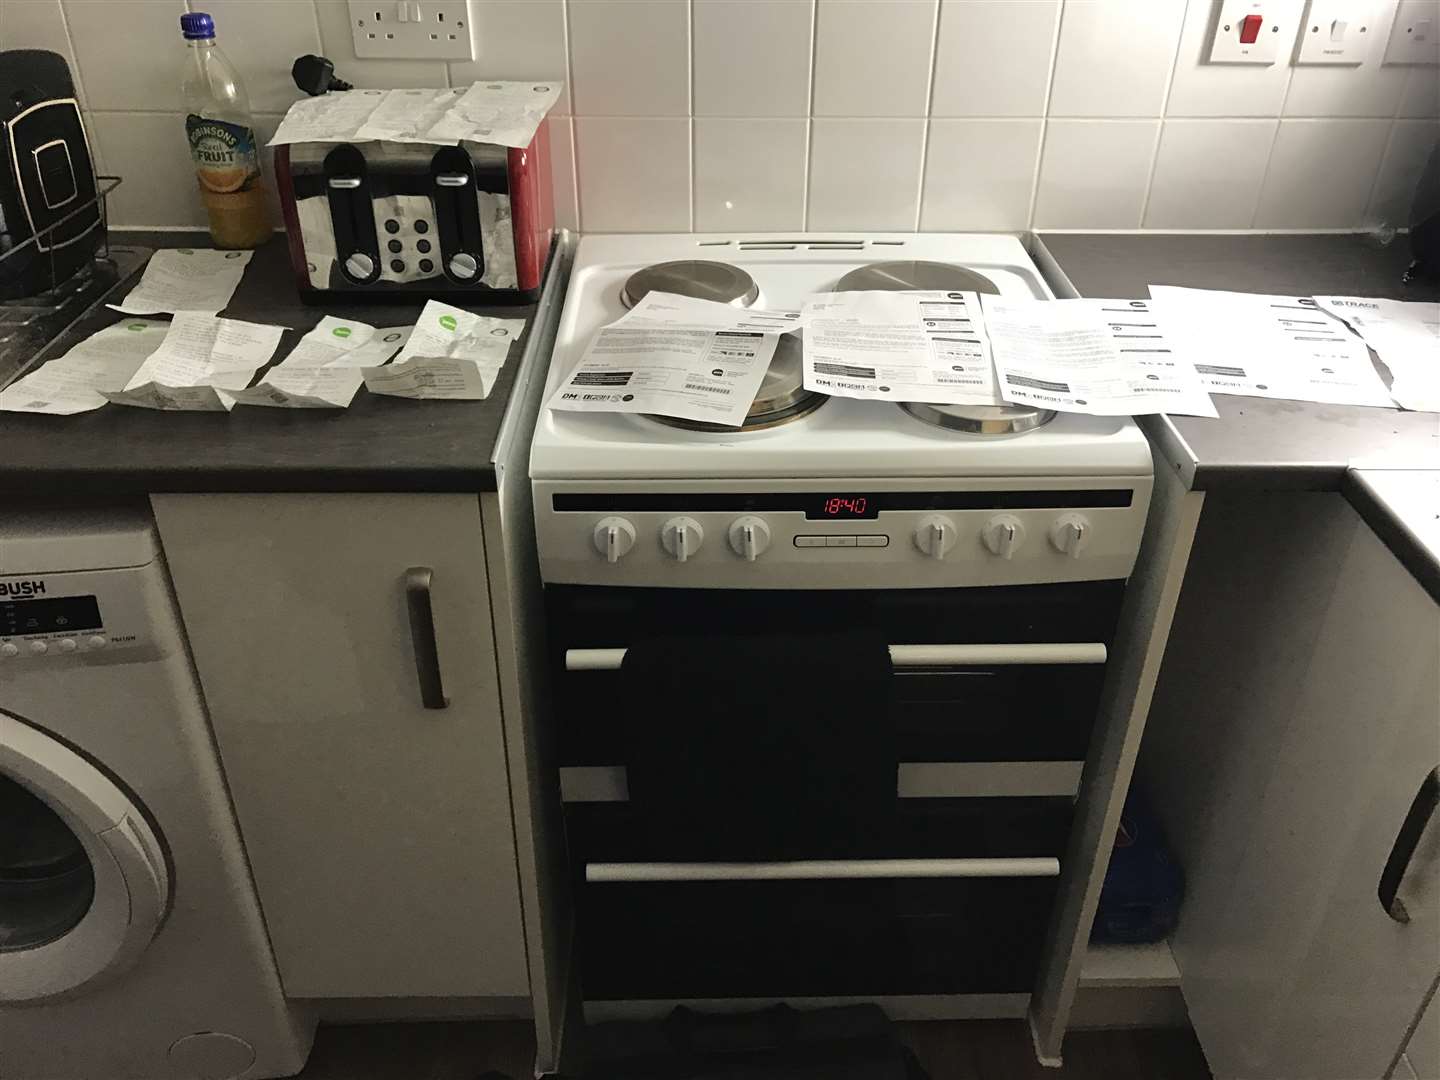 Dan Horwood could probably refit his kitchen with the cost of these parking fines